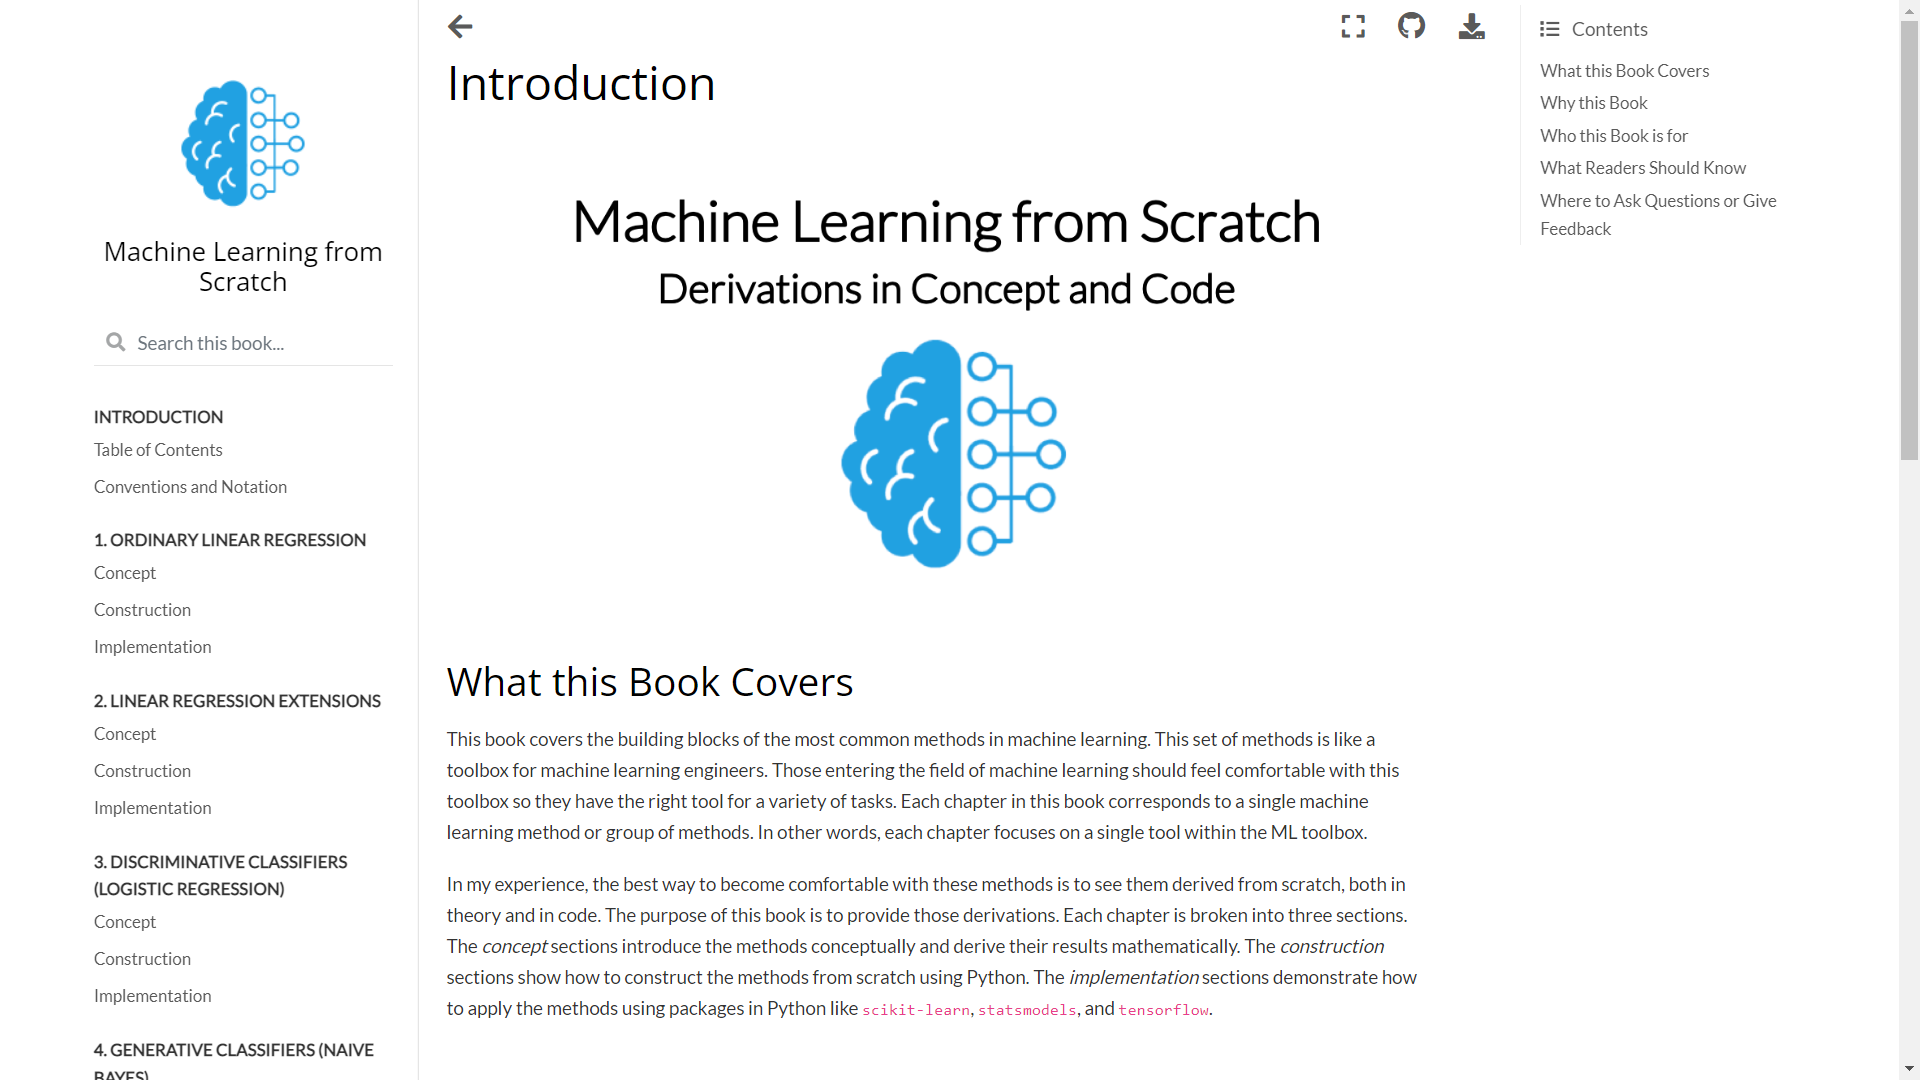 https://cloud-8a7zk0yej-hack-club-bot.vercel.app/0machine_learning_from_scratch.png